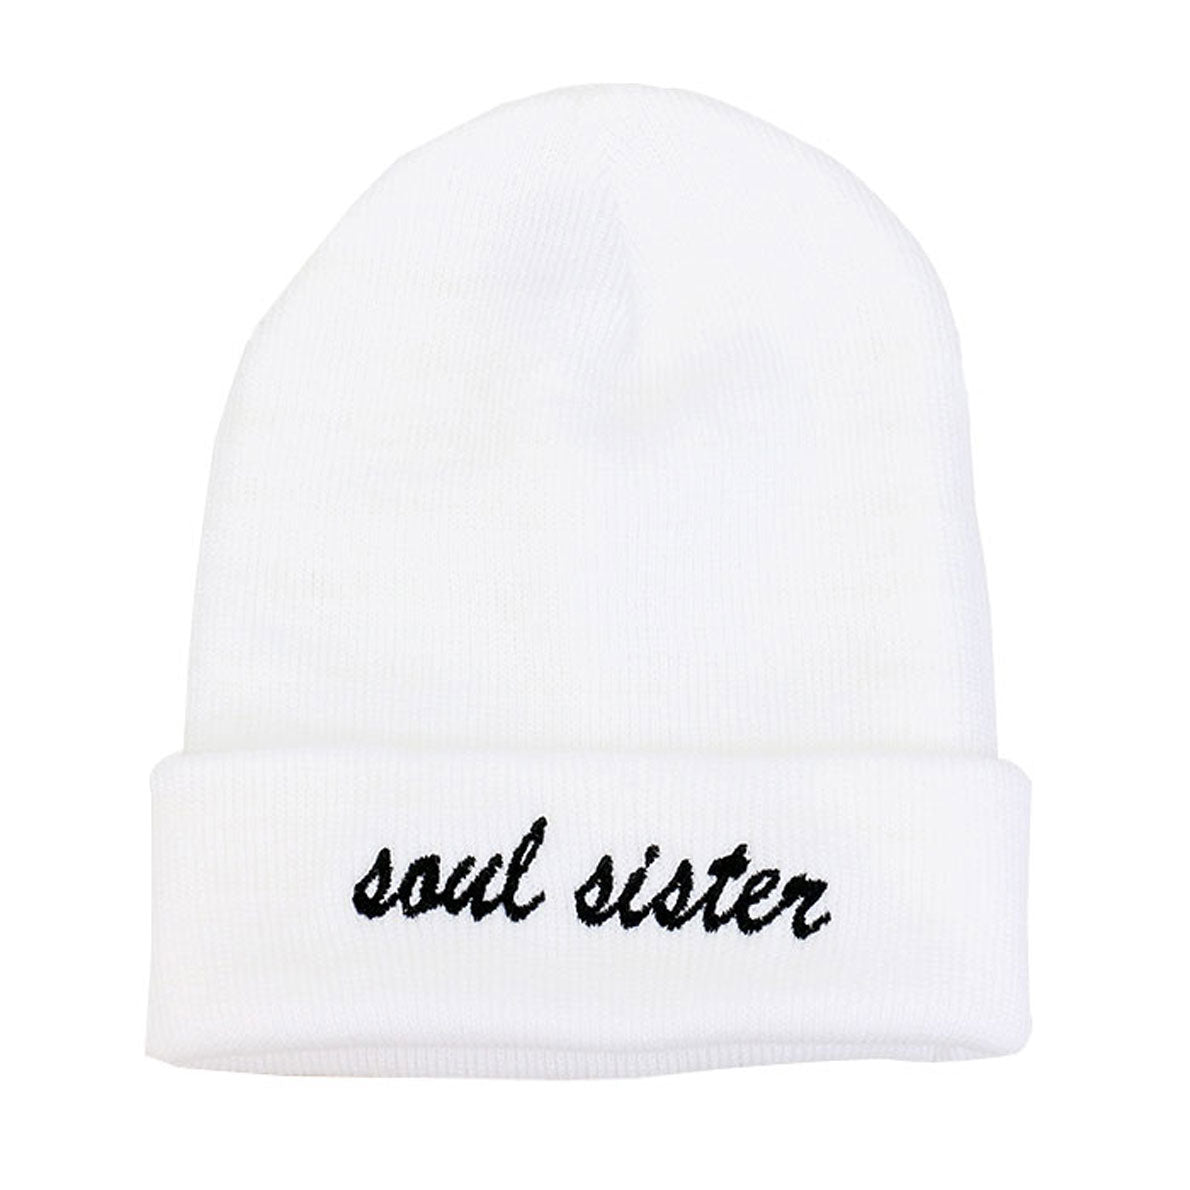 White Soul Sister Soft Solid Color Beanie Hat, Before running out the door into the cool air, you’ll want to reach for these toasty beanie to keep your hands warm. Accessorize the fun way with these beanie, it's the autumnal touch you need to finish your outfit in style. Awesome winter gift accessory!